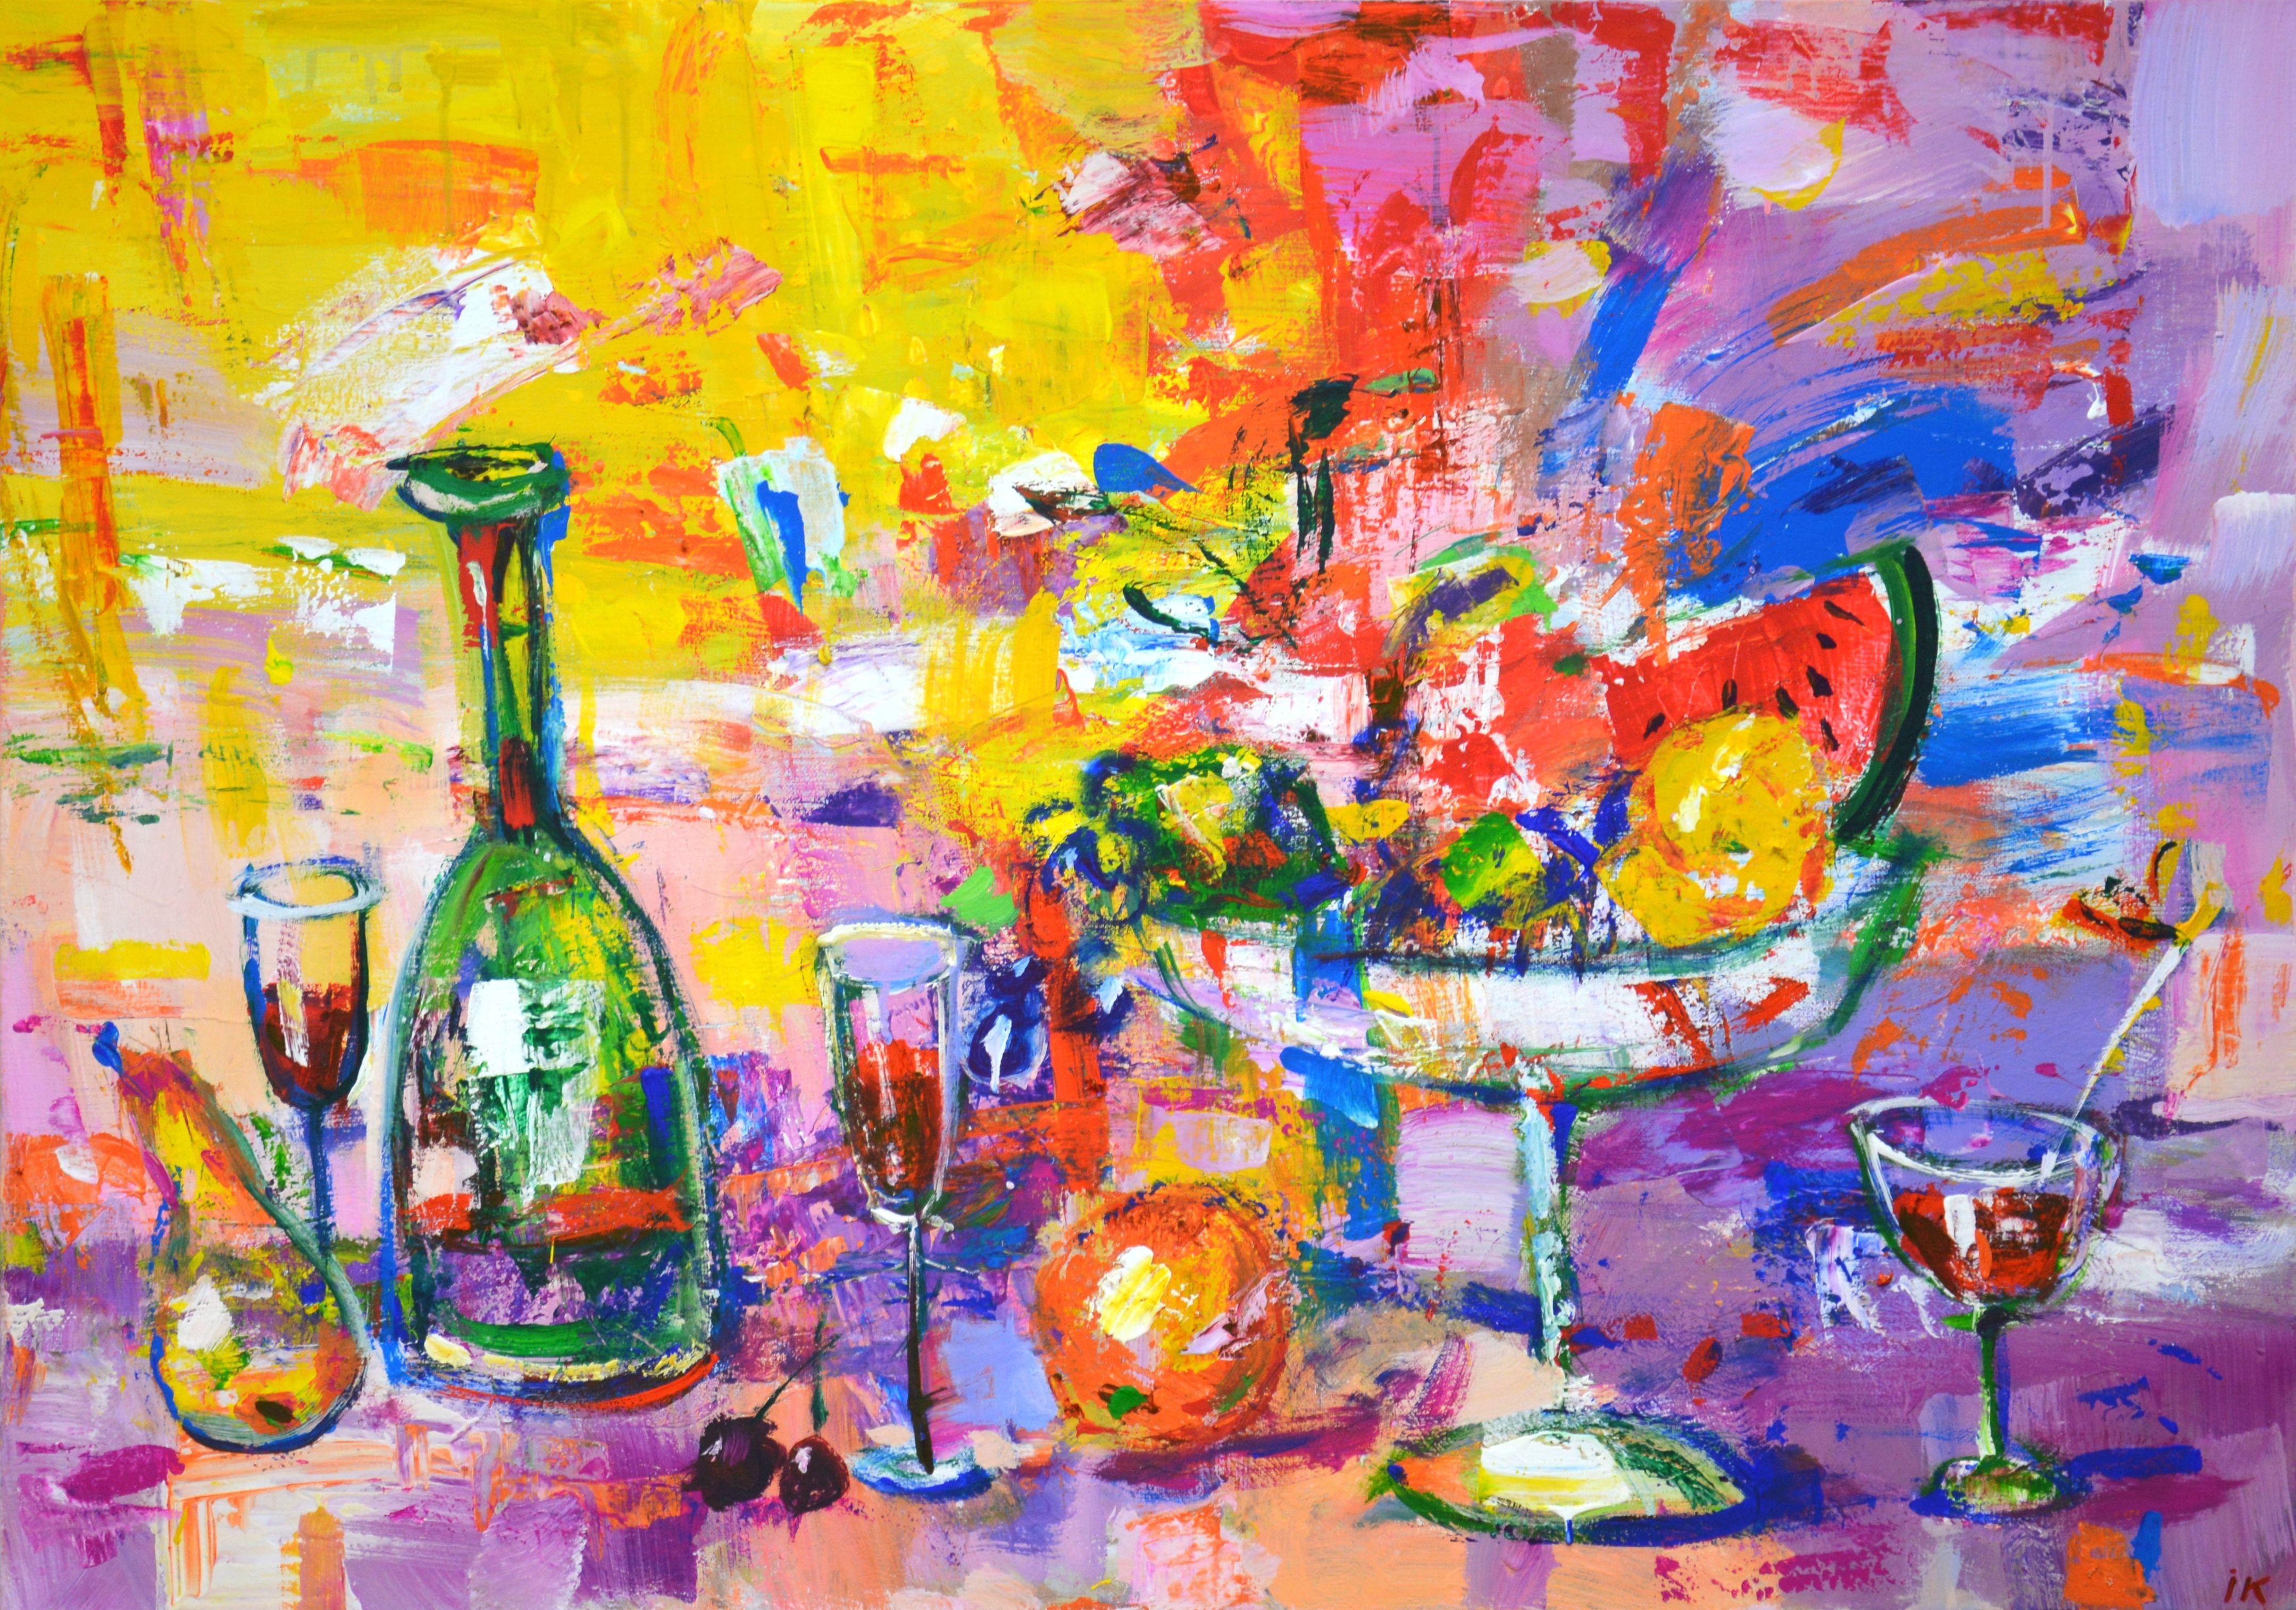 Happy Holidays! An expressive, bright still life: a vase of fruit: apples, pears, grapes, watermelon, a bottle of wine, glasses, on an abstract background.  The painting was painted expressively with a brush and a spatula.  Part of an ongoing series